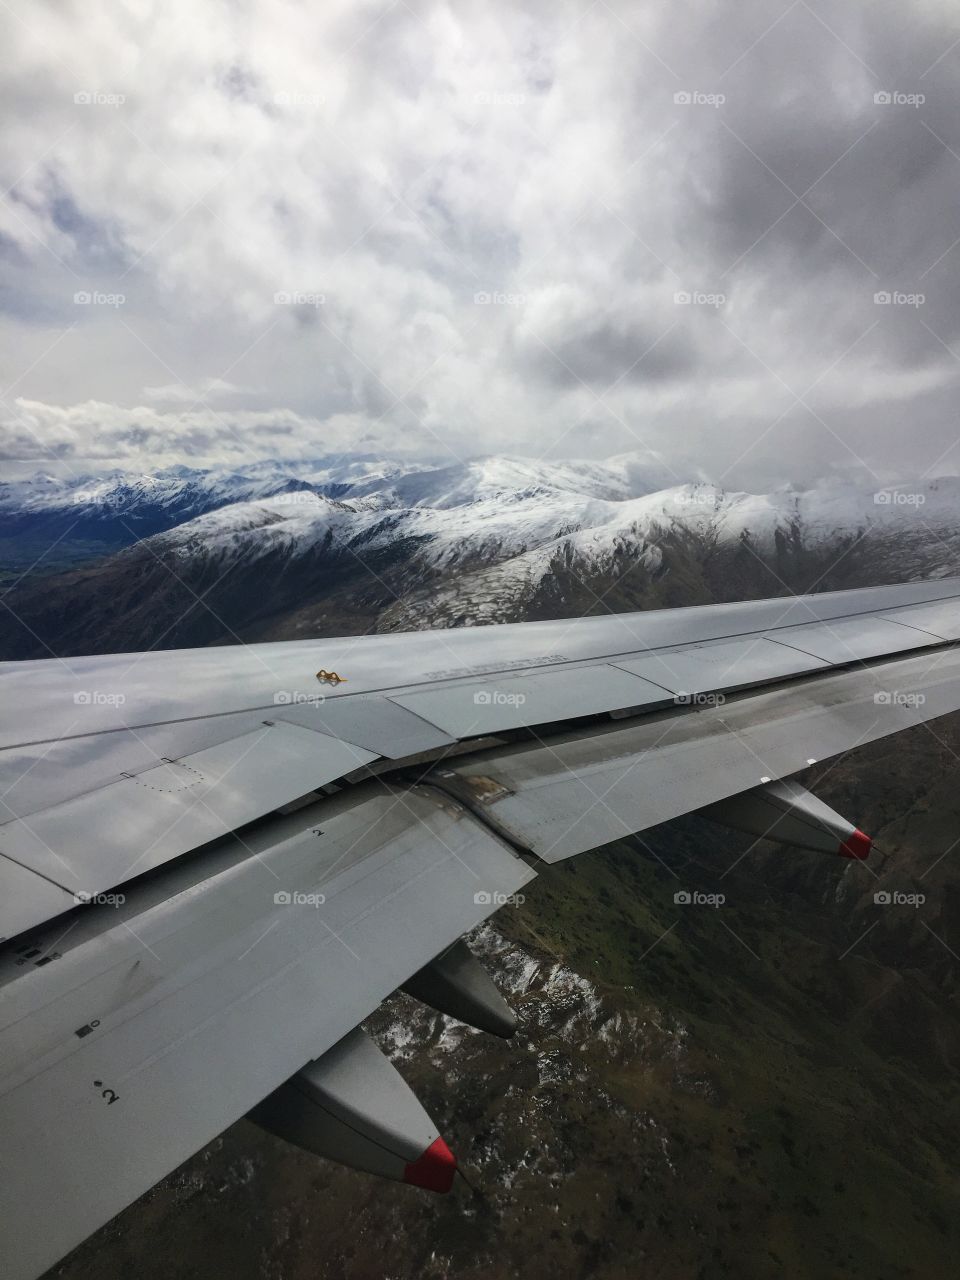 Southern Alps from the aircraft window 